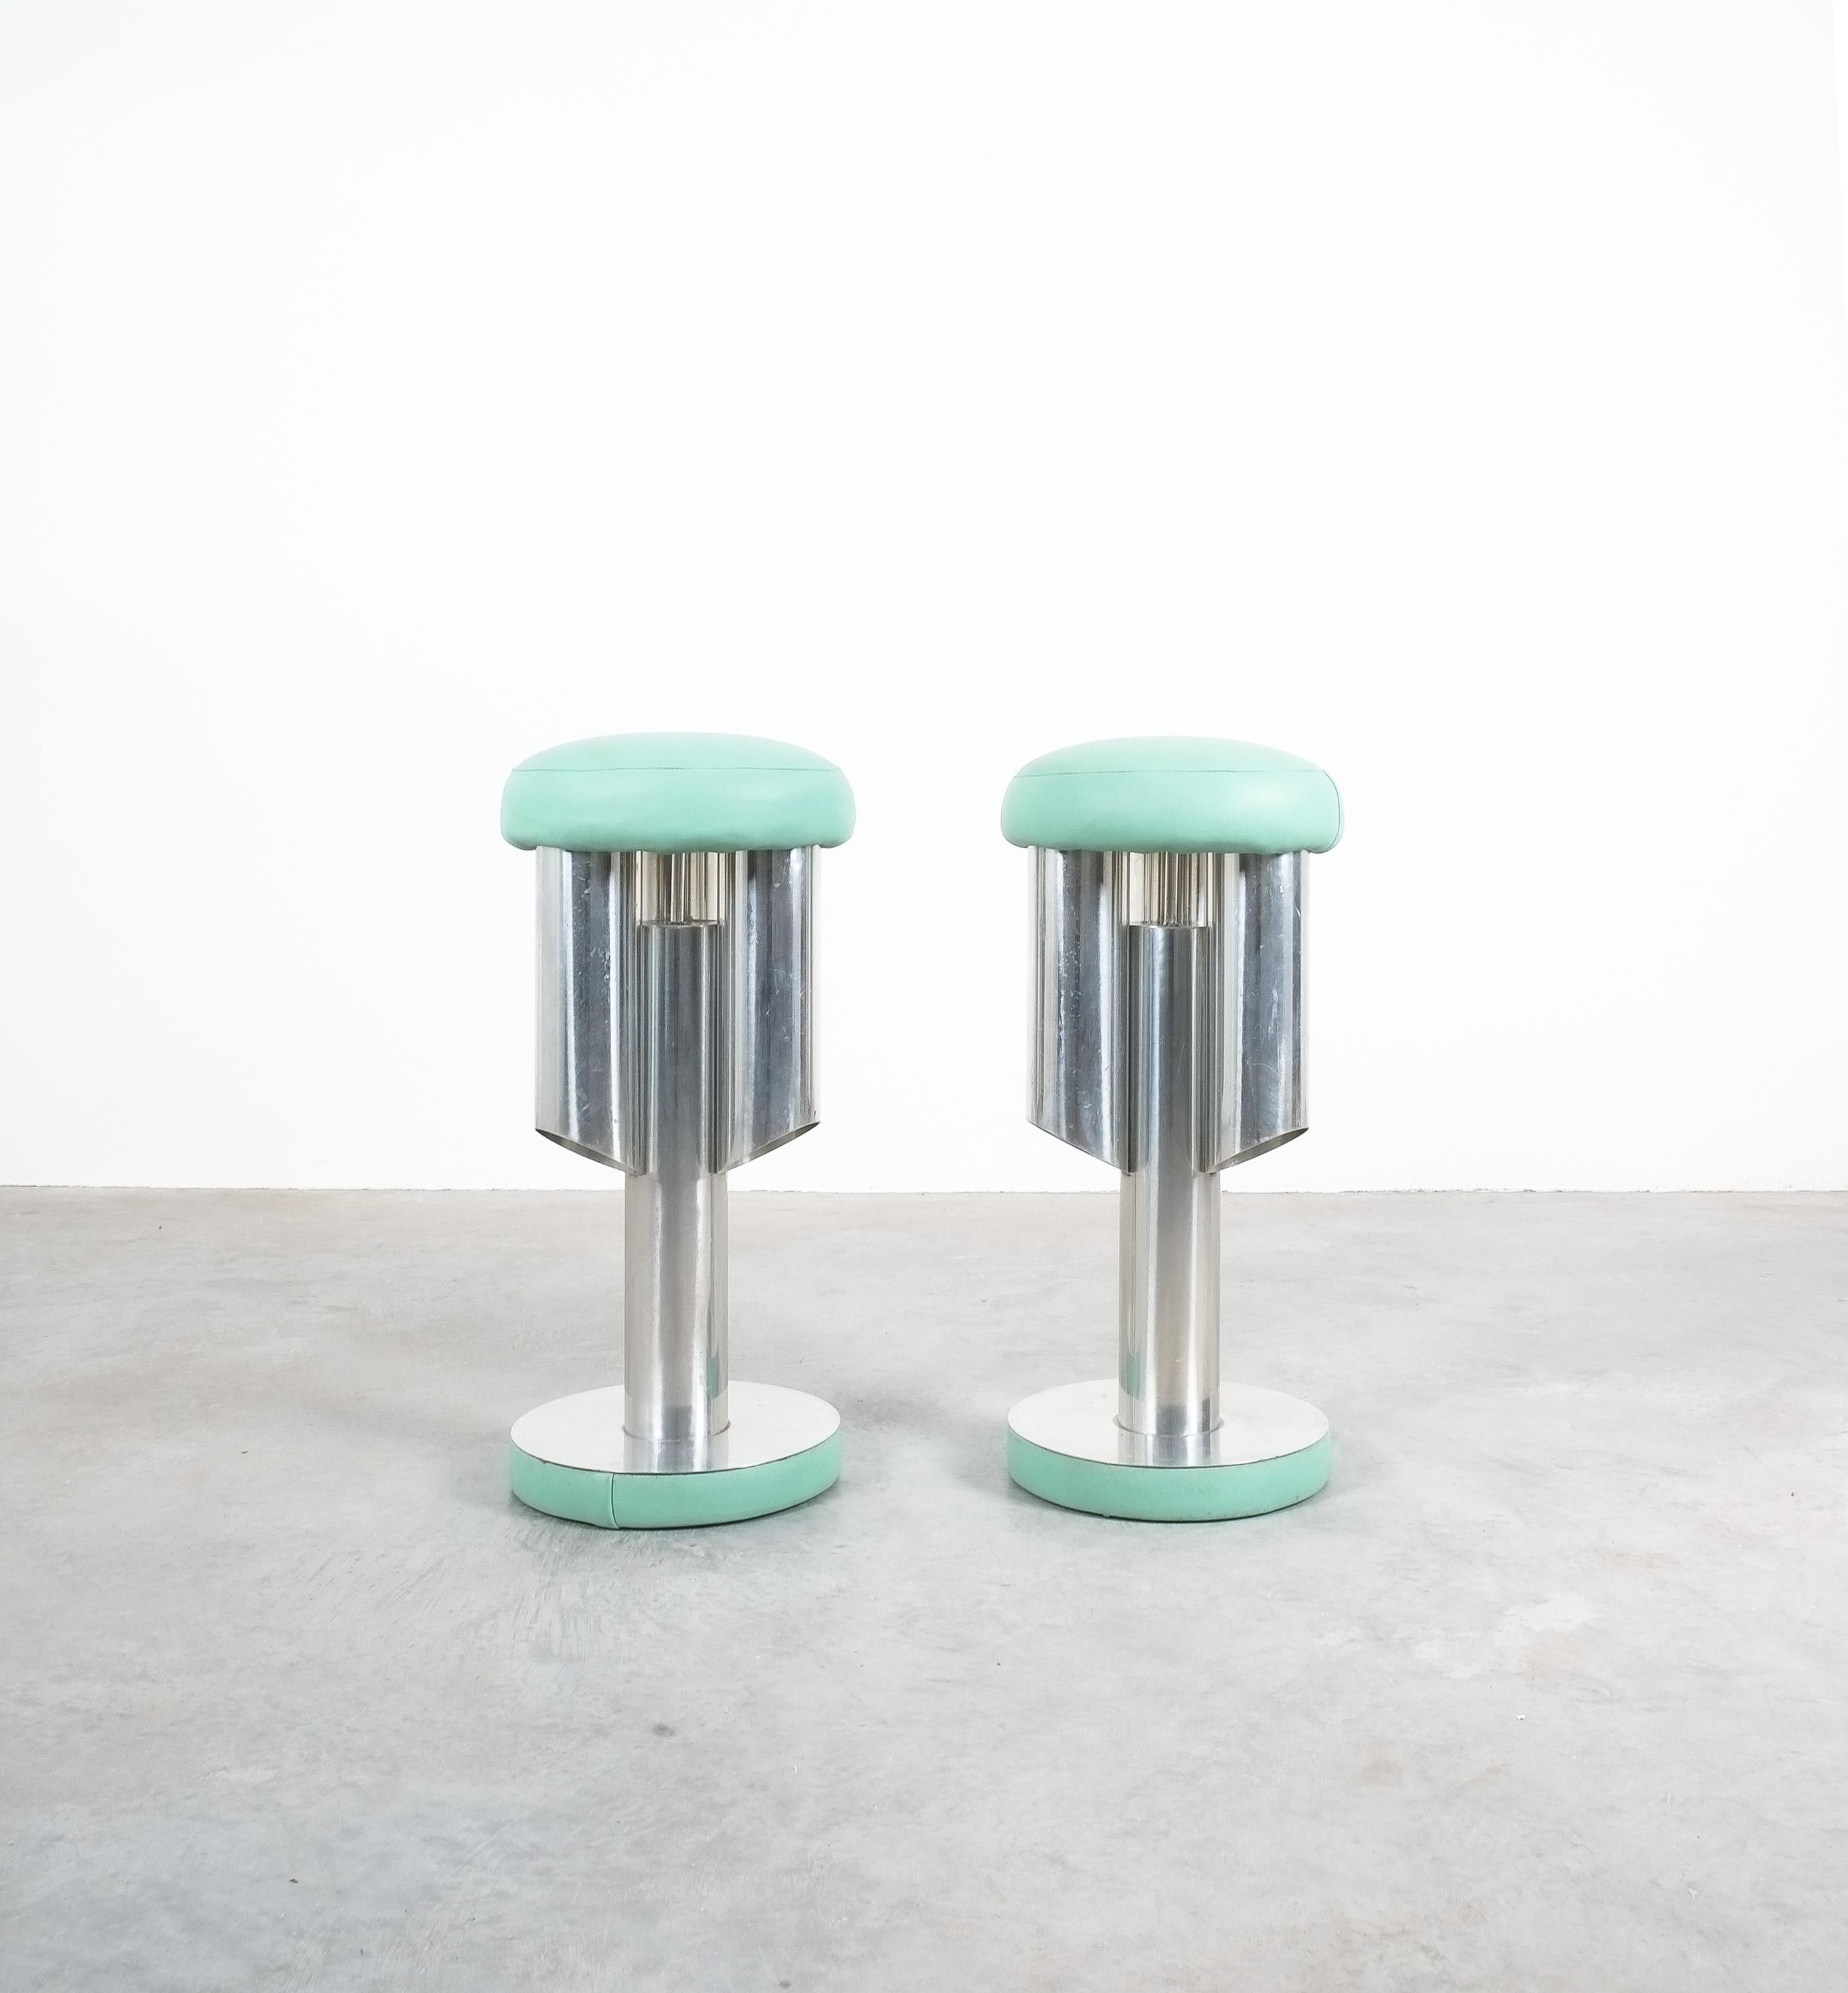 Italian Pair of Midcentury Rocket Stools from Aluminum and Leather, Italy